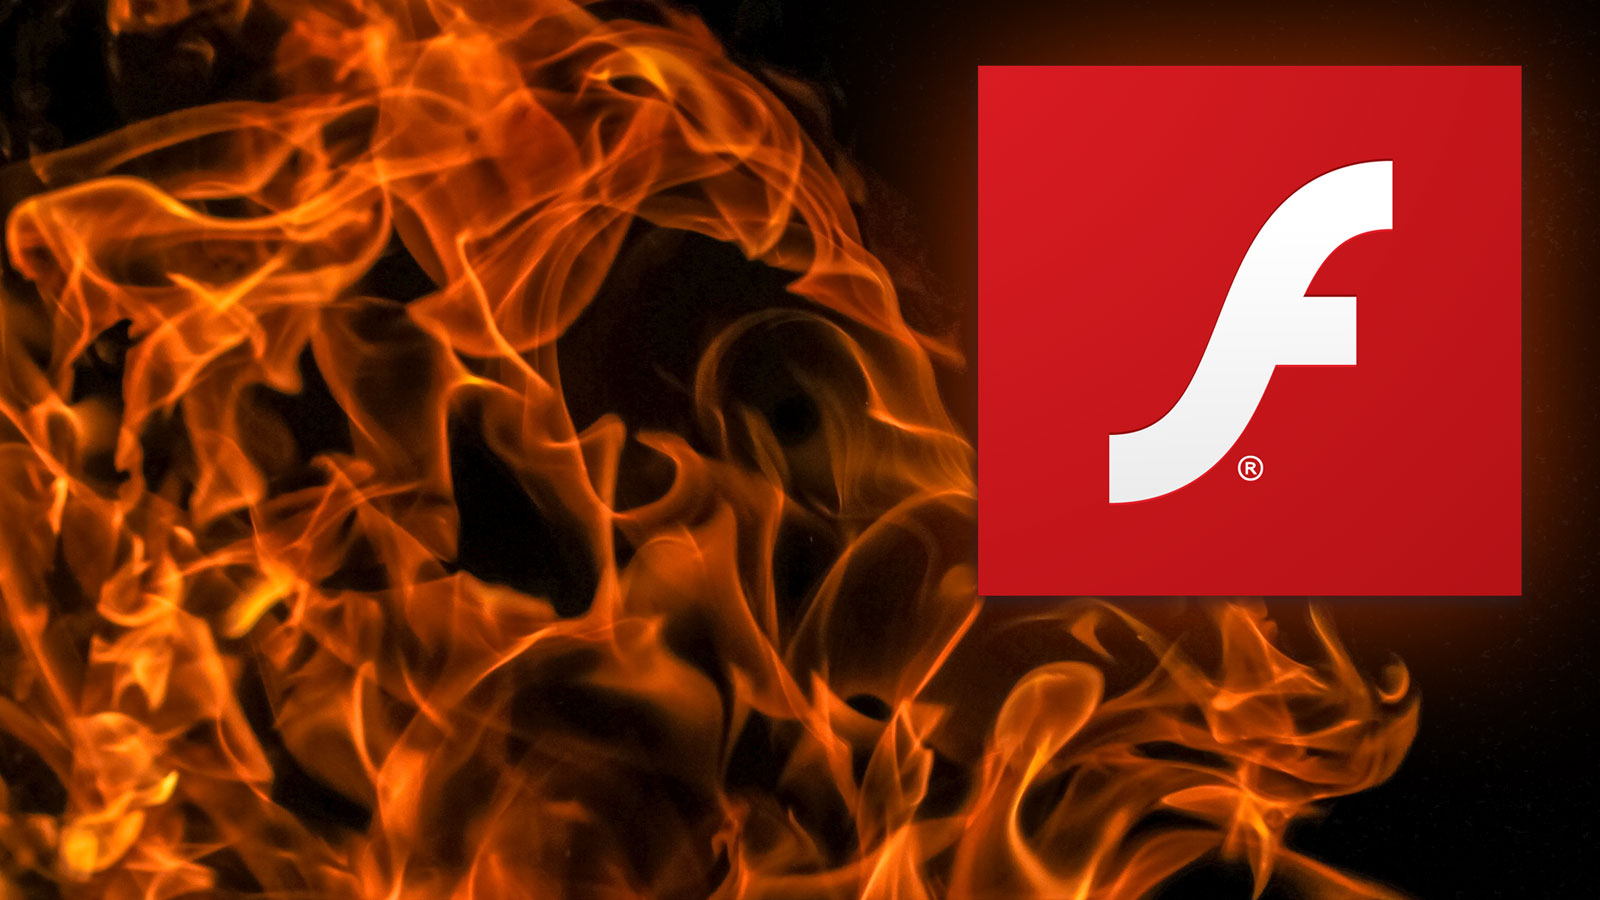 Adobe Flash Professional Cc Crack 20 0 5 And Serial Number Free Is Here